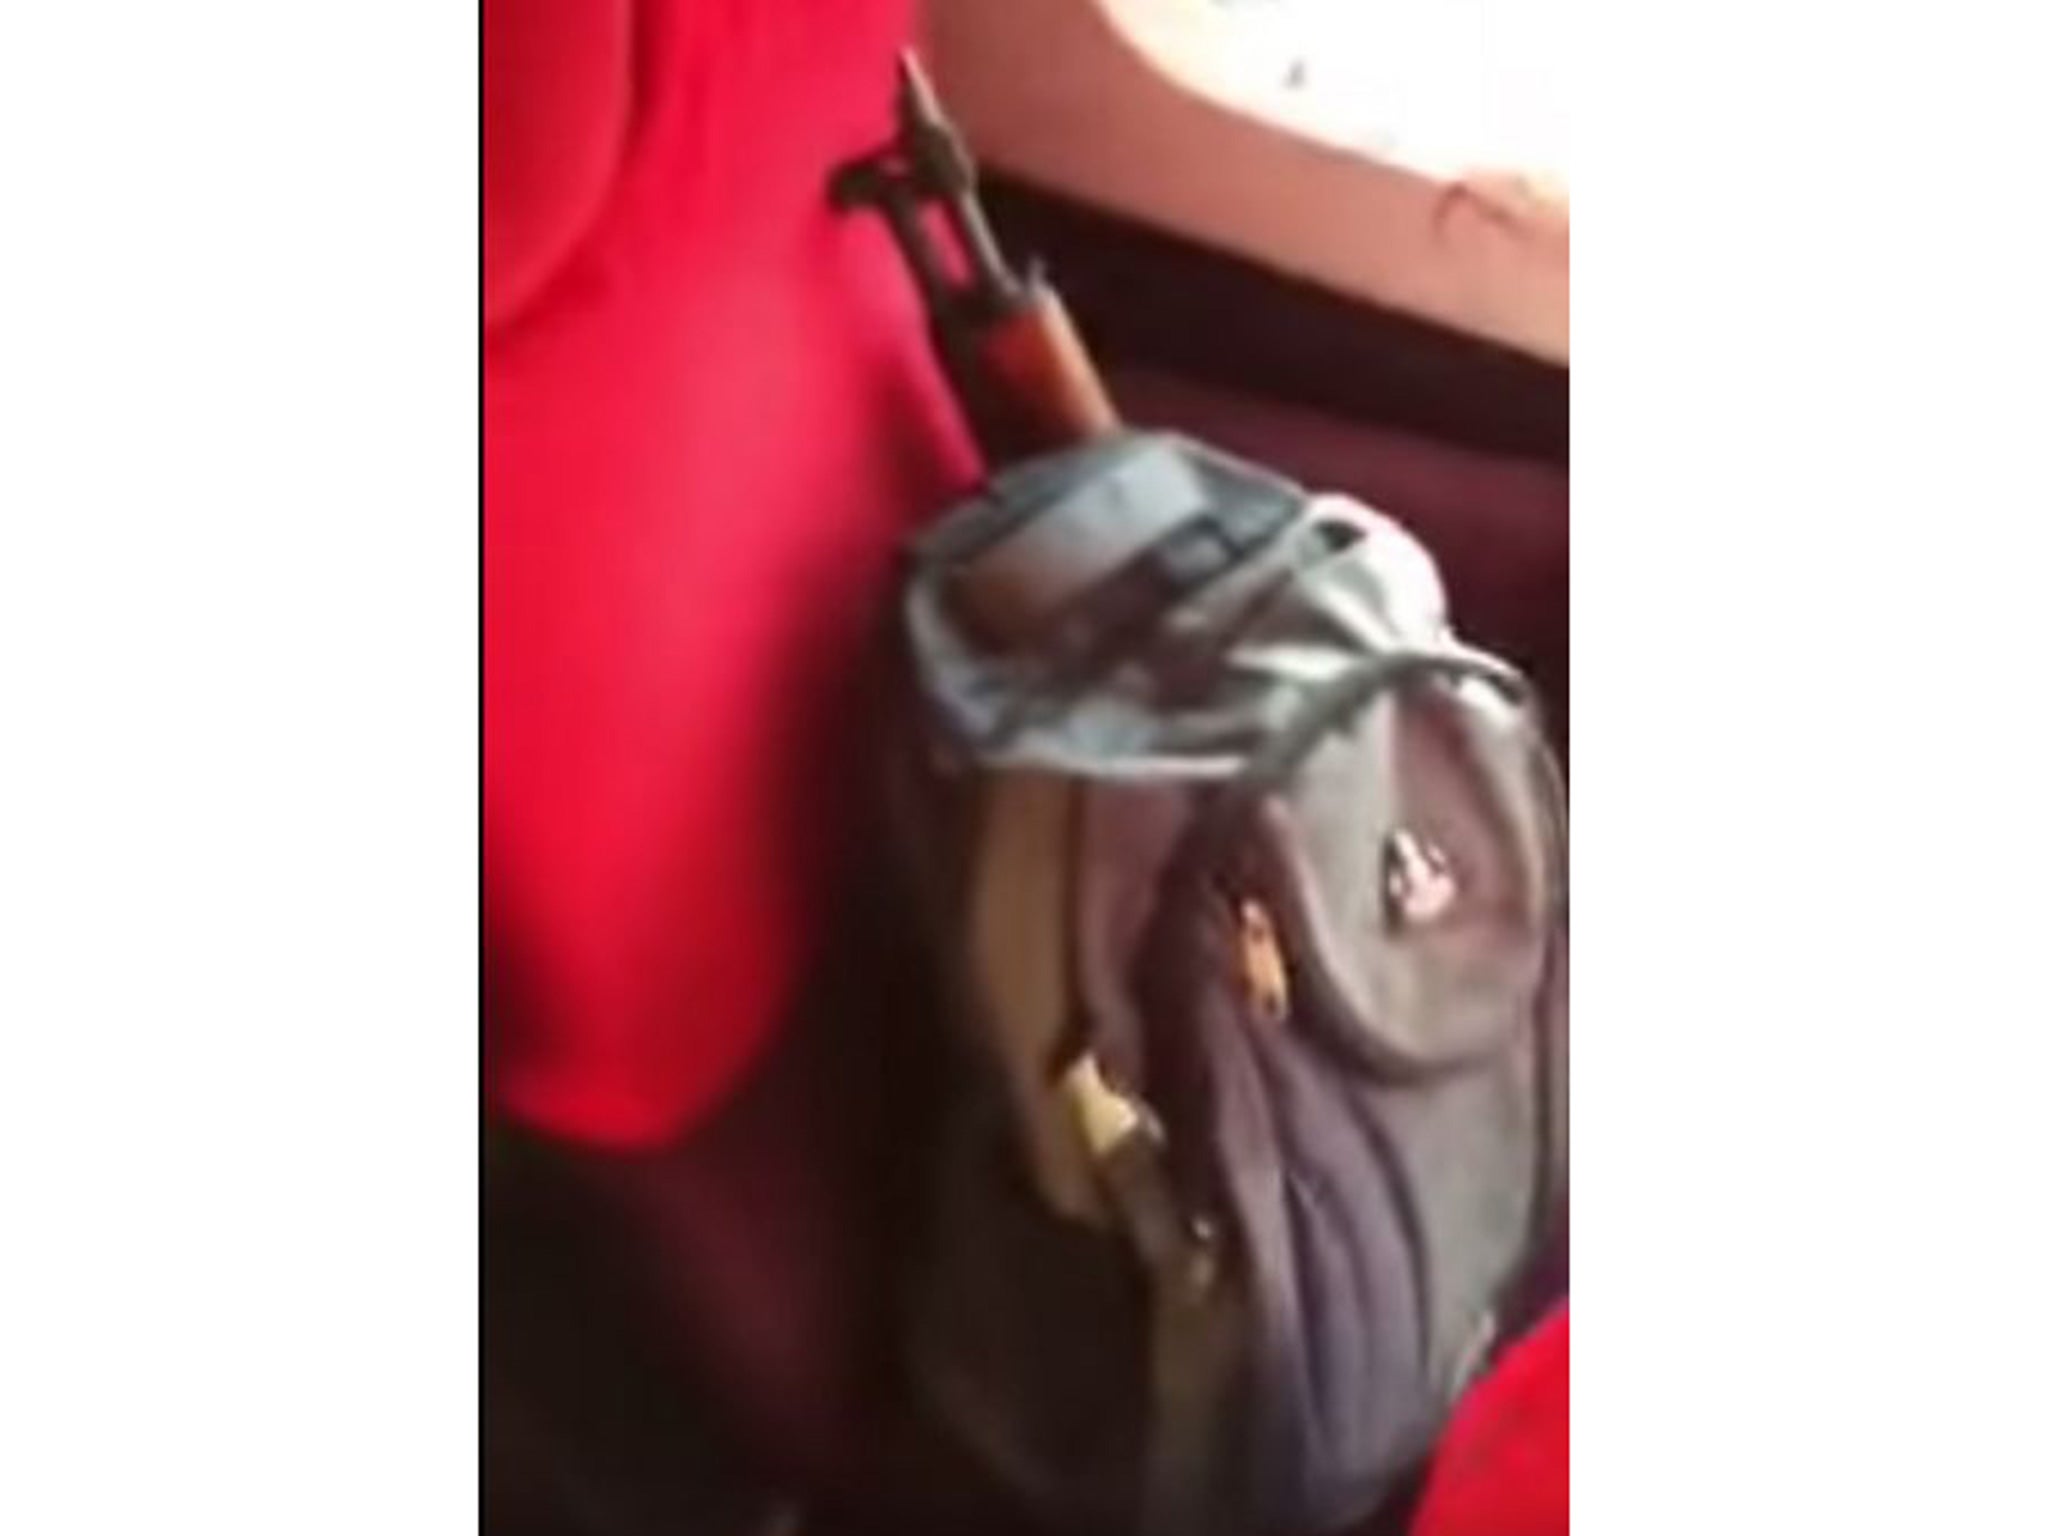 The AK-47 with a backpack